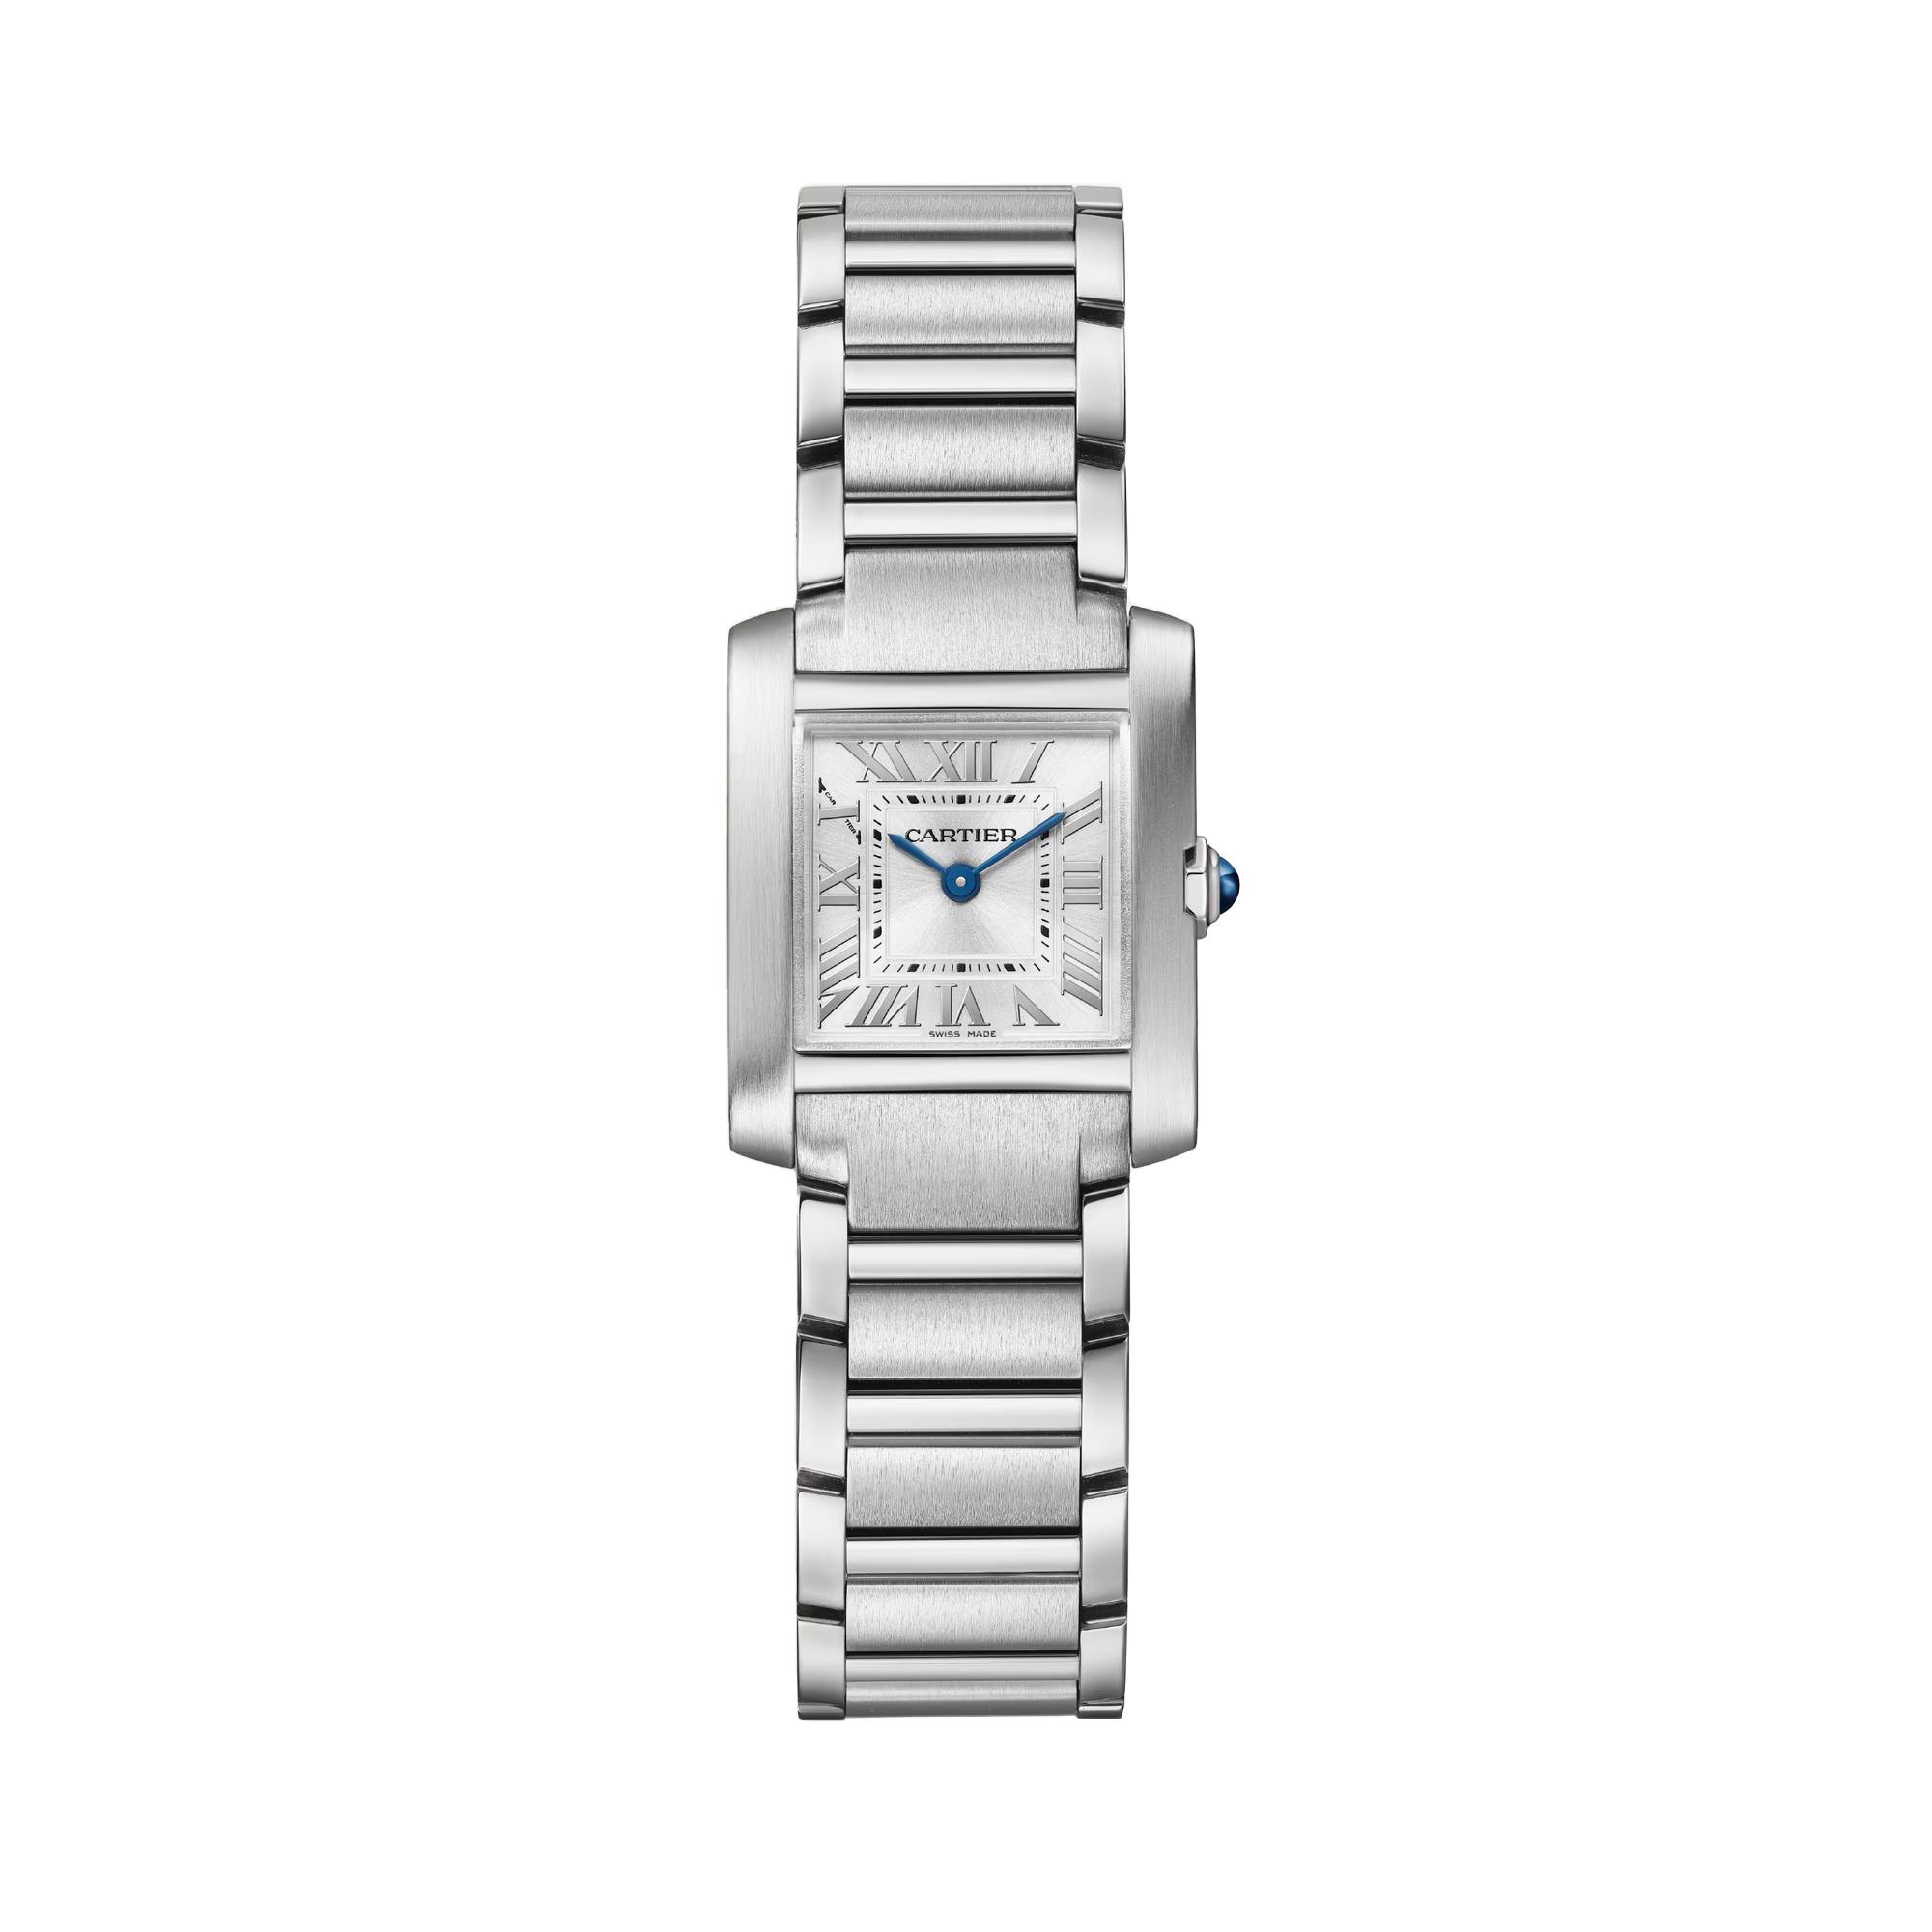 Cartier Tank Francaise Watch, size small